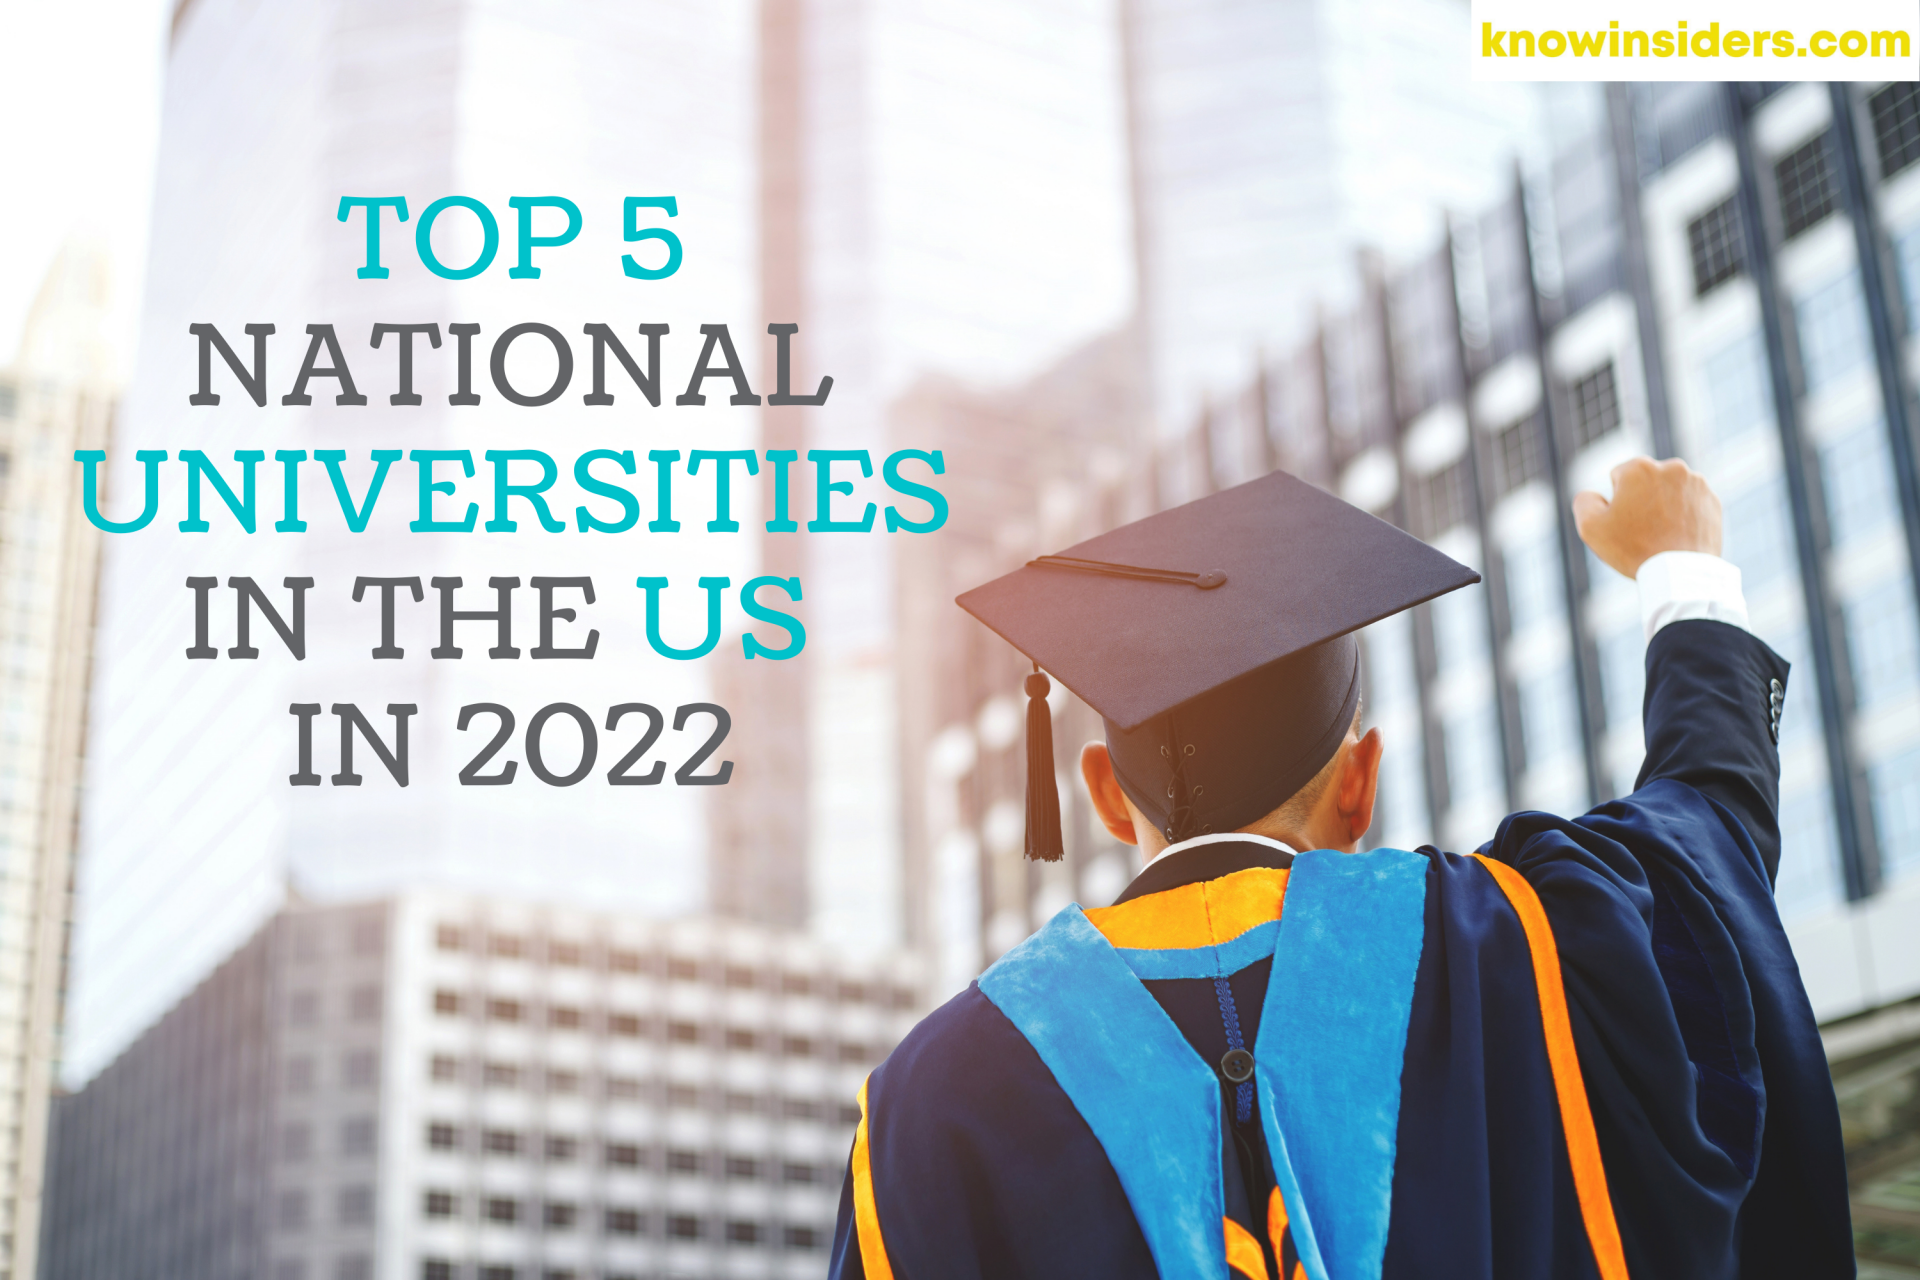 Top 5 Best National Universities In The United States for 2022